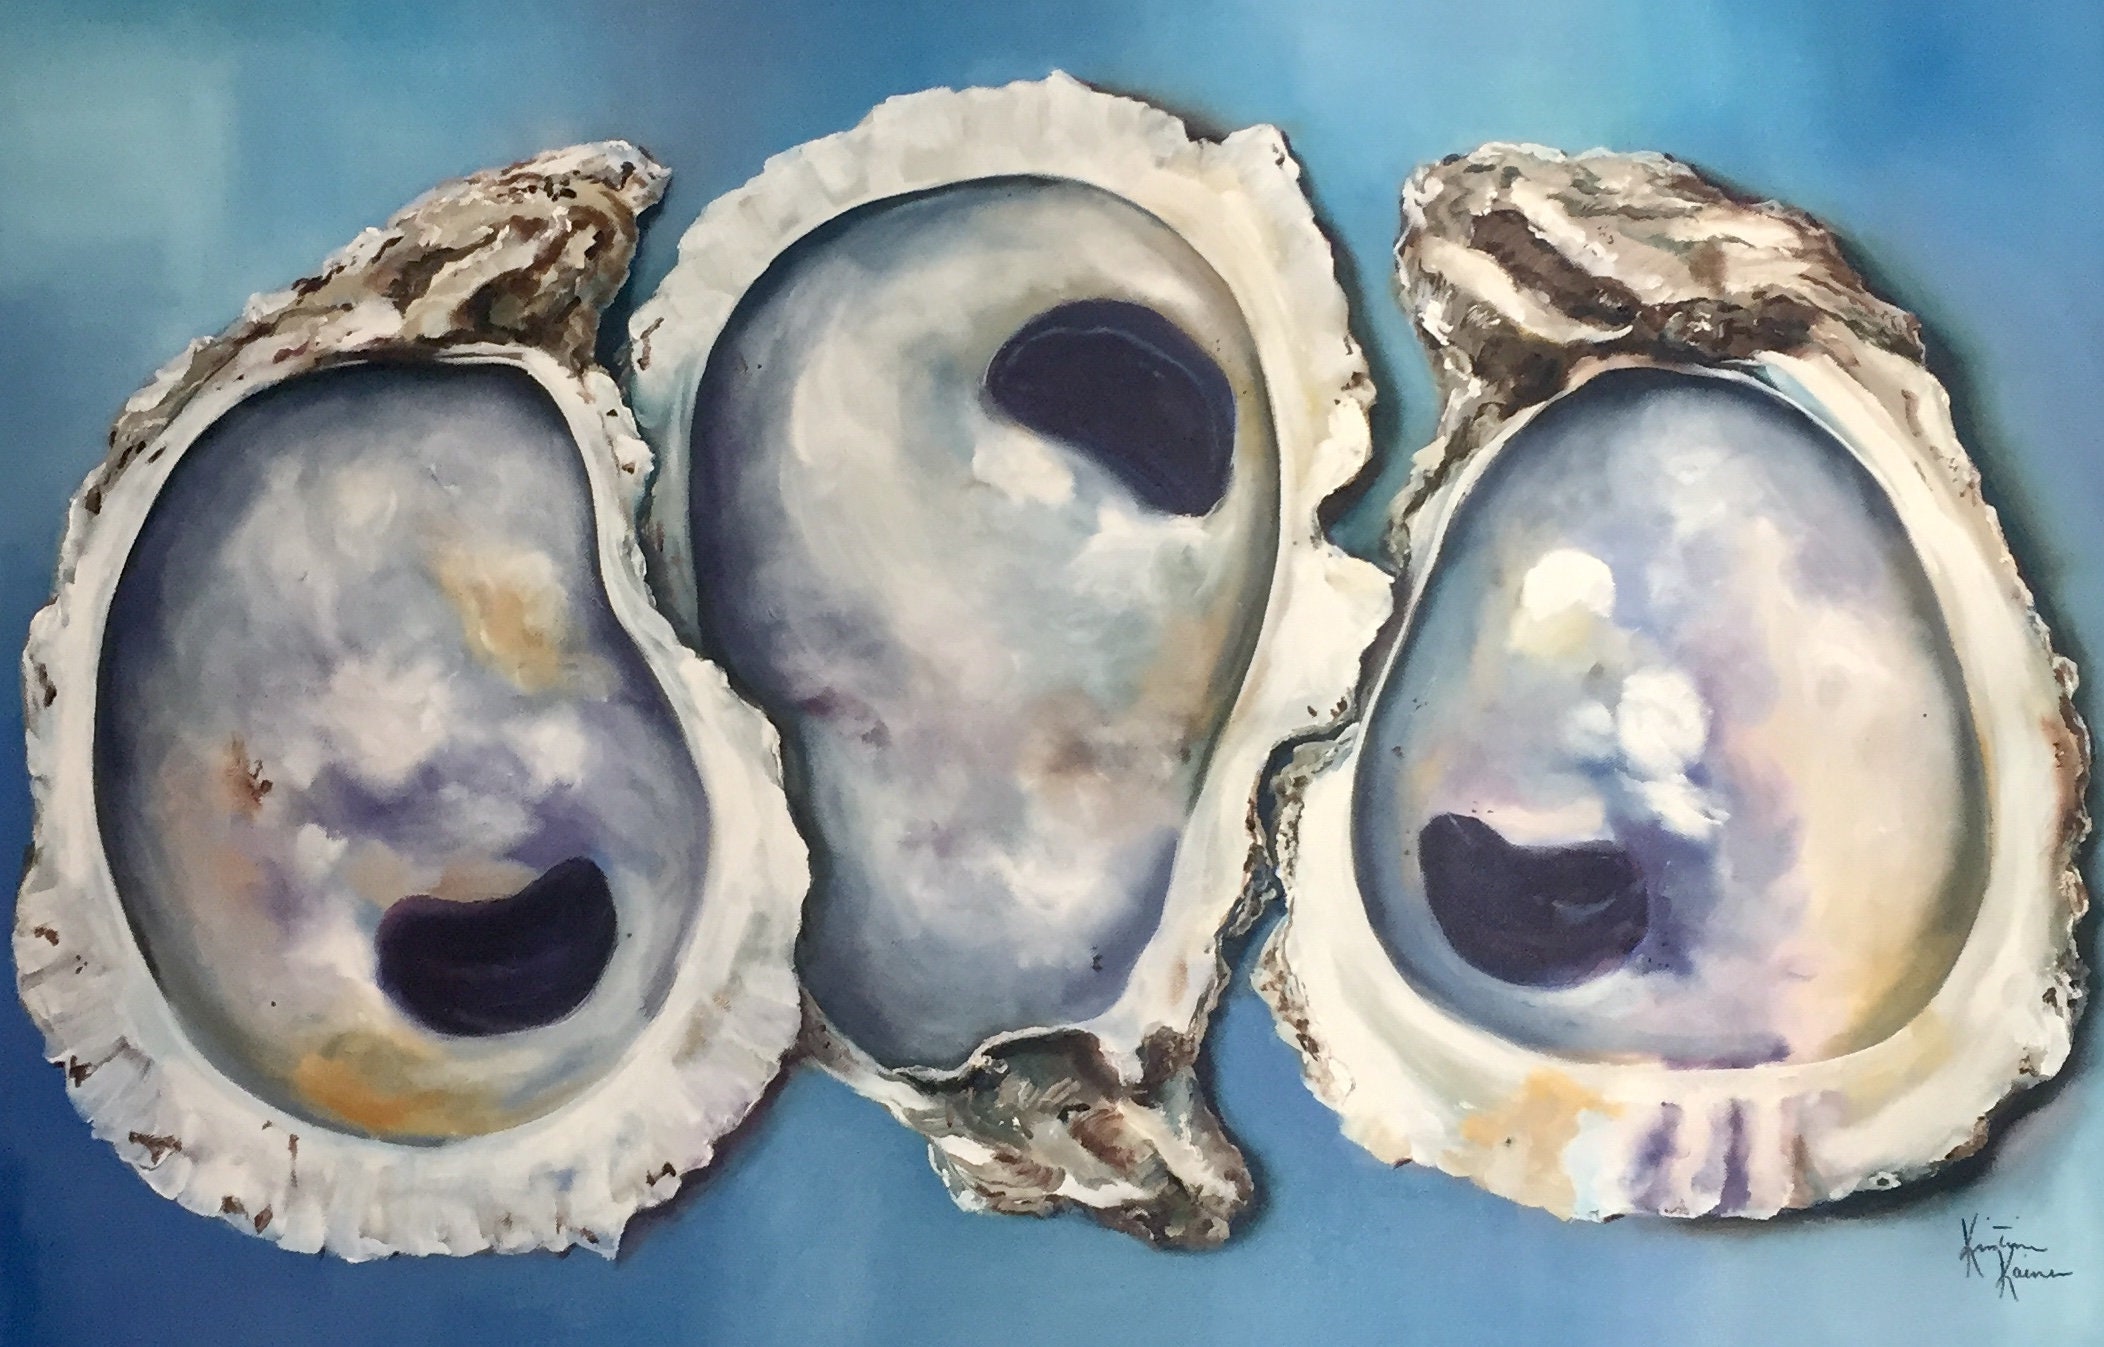 Oyster Shells On Blue Oysters Coastal Art Shellfish Seafood Original Oil Painting 36x24 By Kristine Kainer